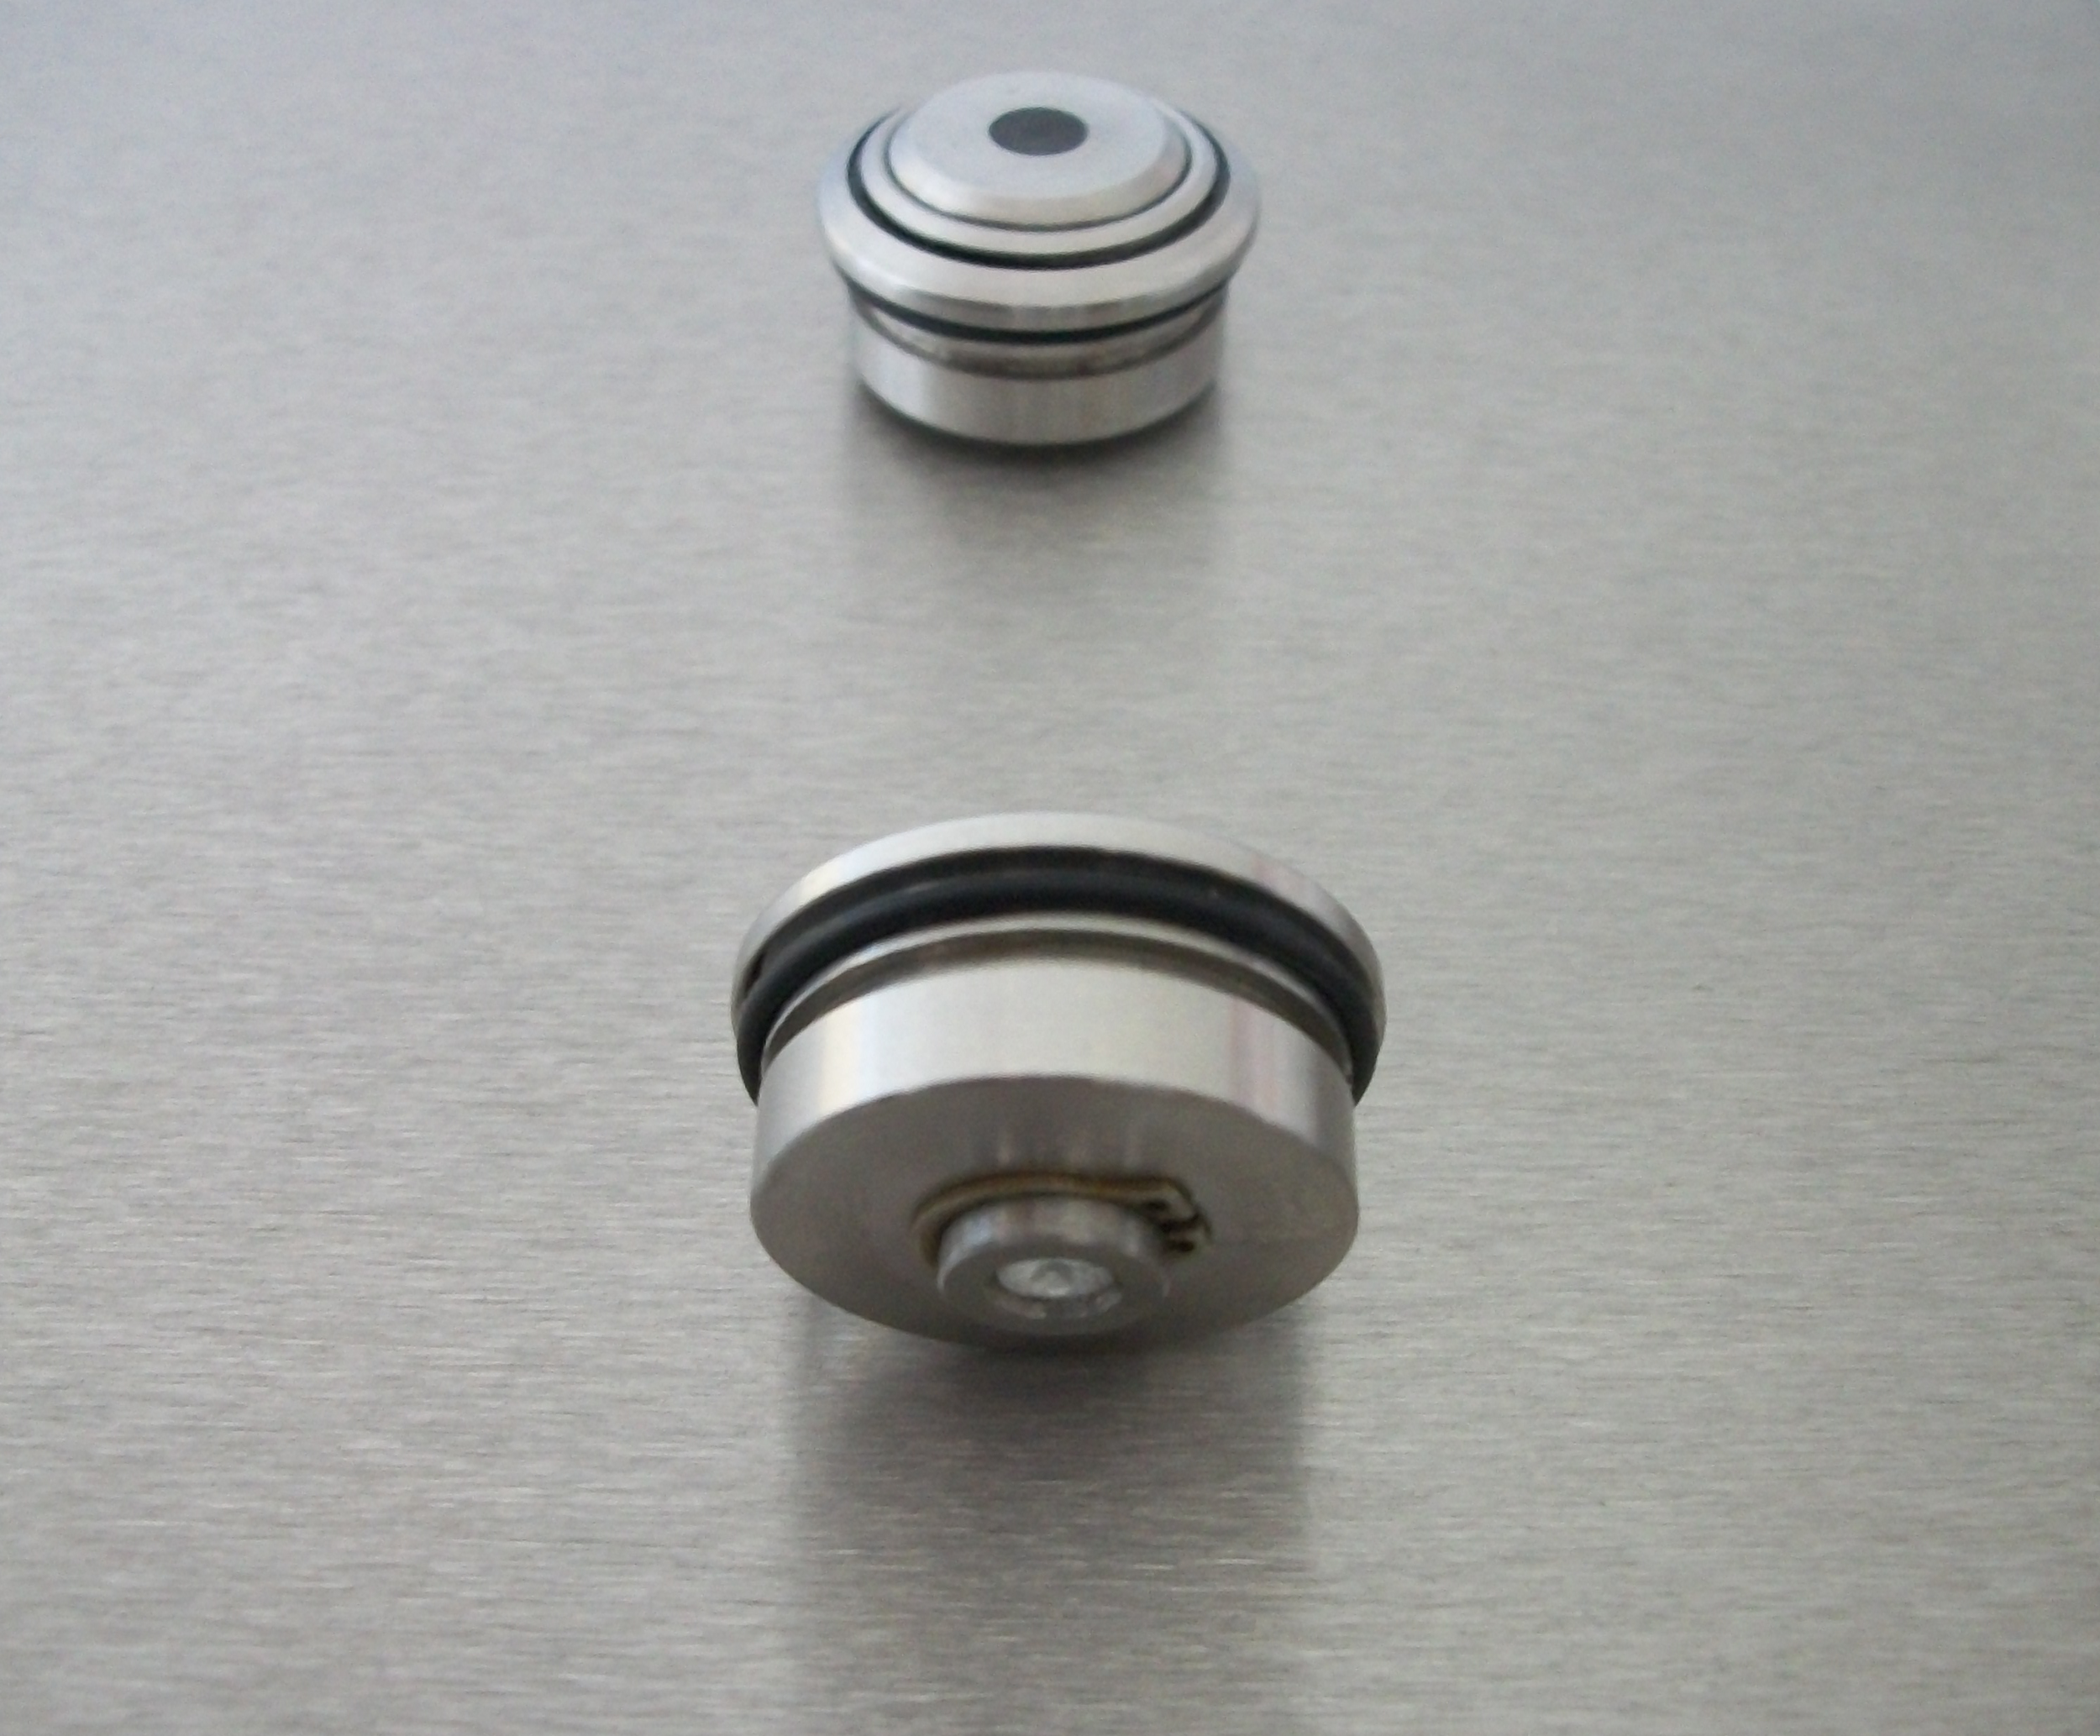 CJA's NEMA 4X VX-I Button - Machined From Solid Type 304 Stainless Steel